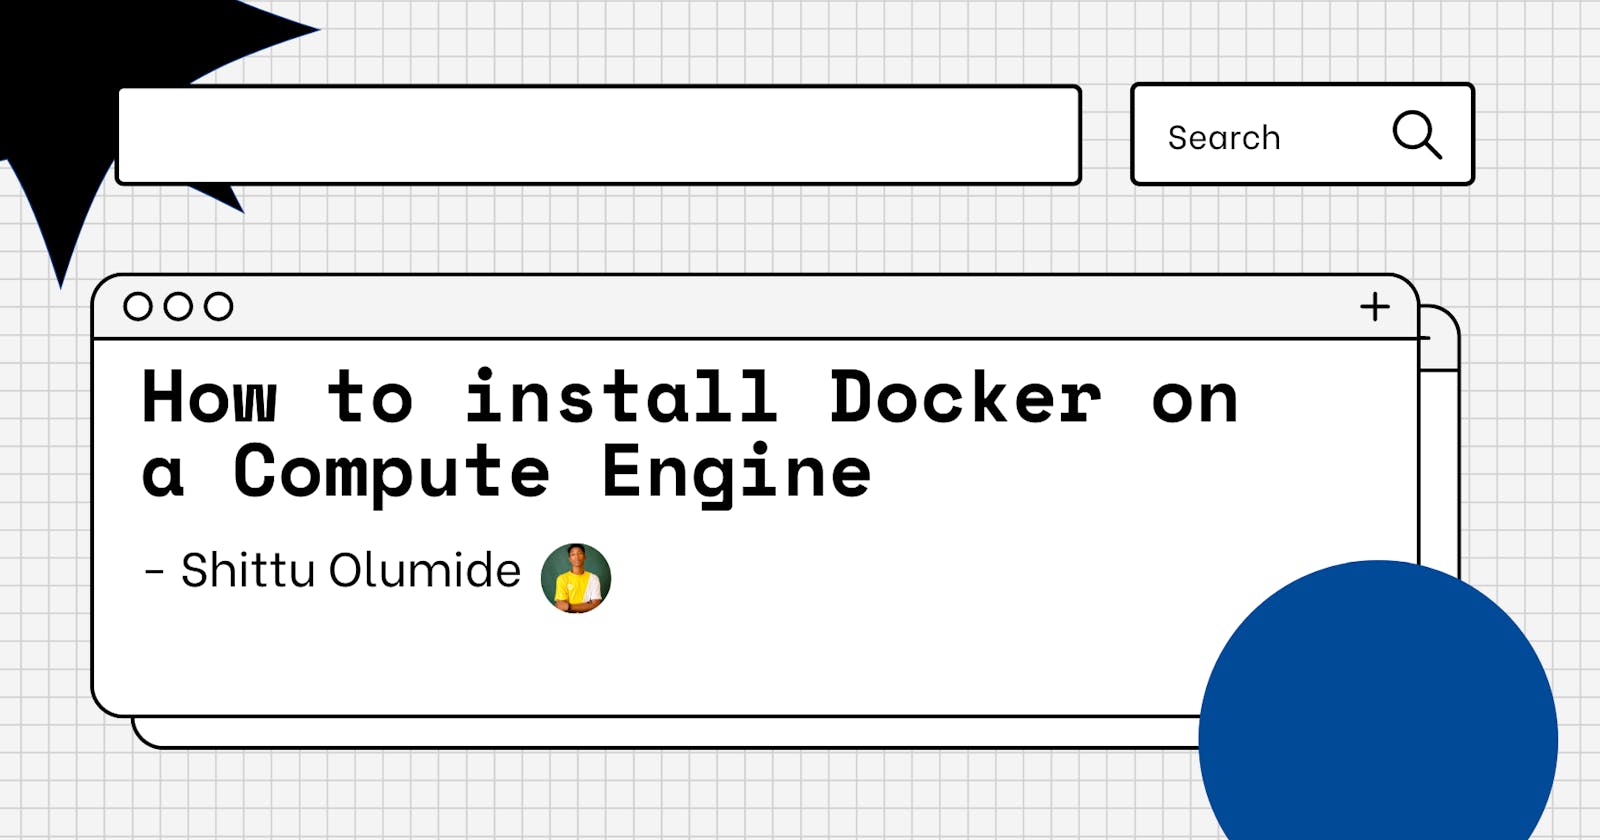 How to install Docker on a Compute Engine